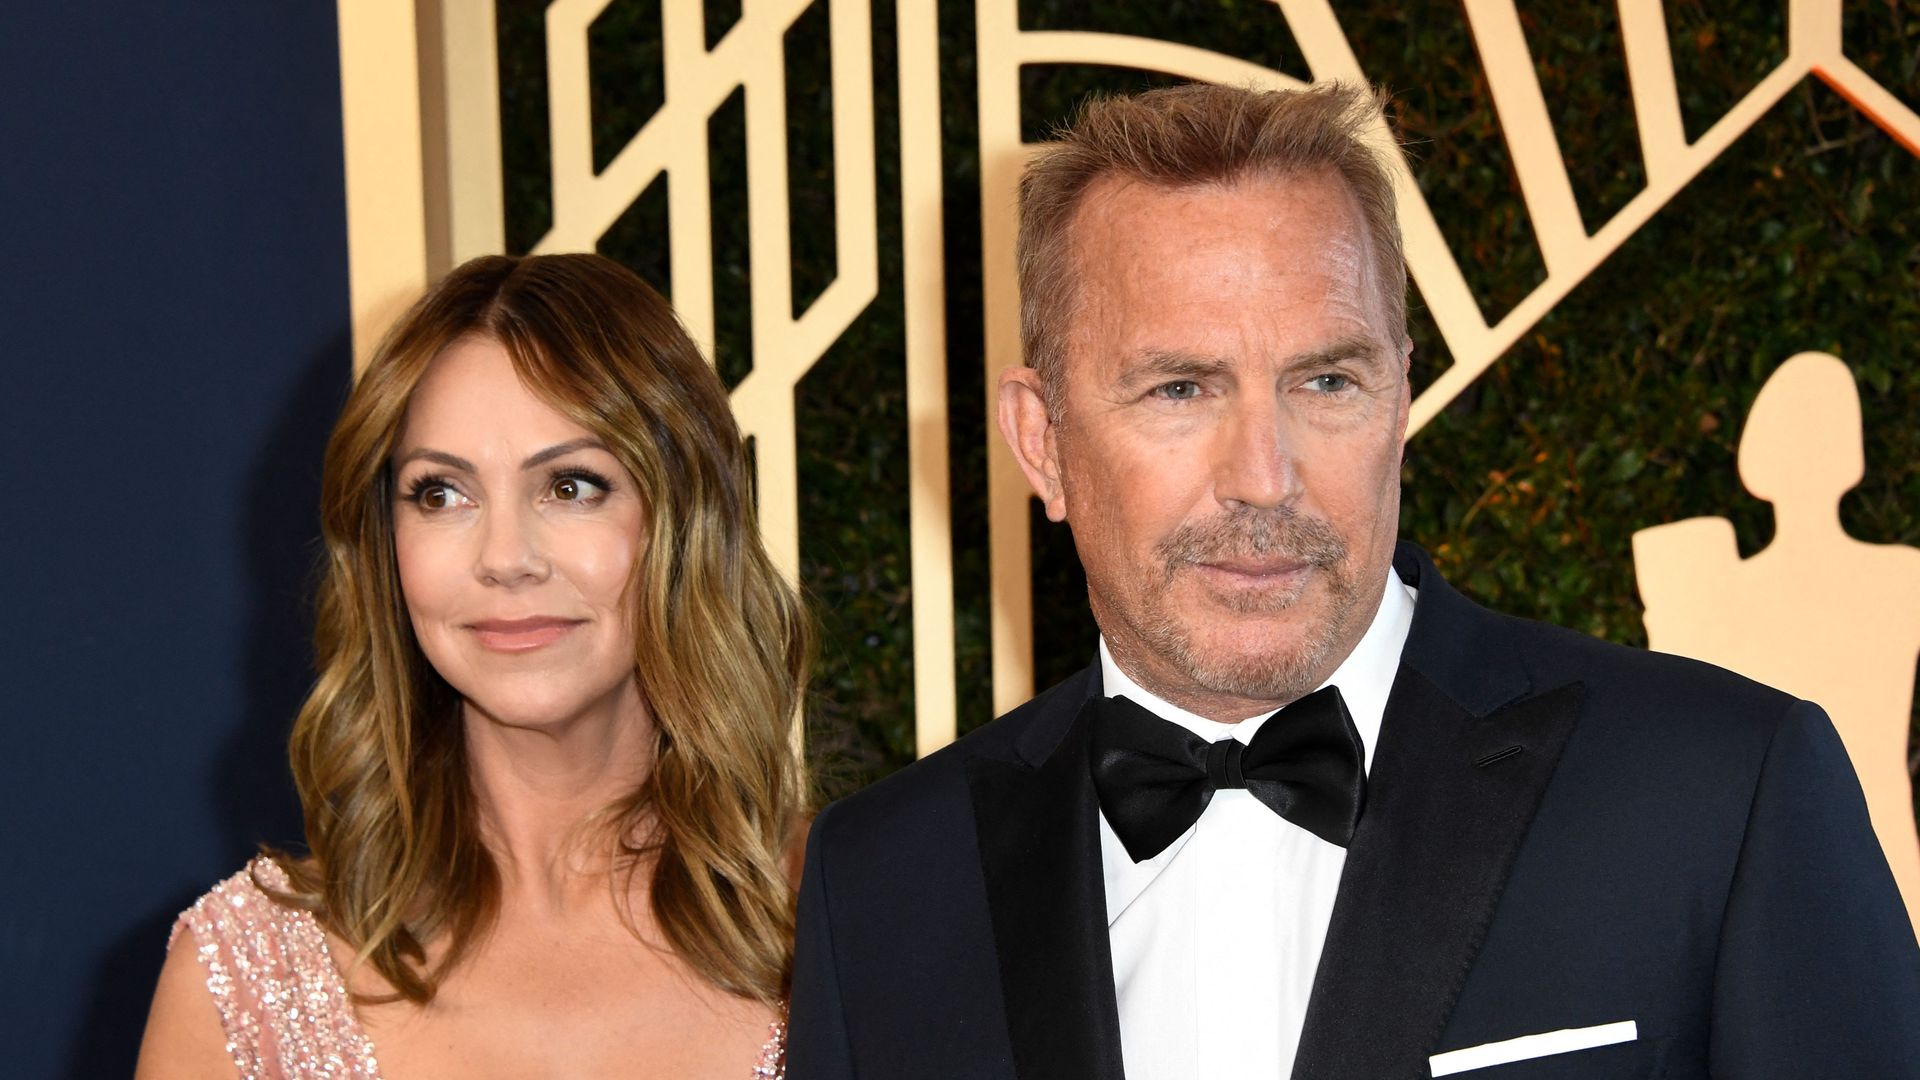 Kevin Costner and Christine Baumgartner arrive for the 28th Annual Screen Actors Guild (SAG) Awards in California on February 27, 2022